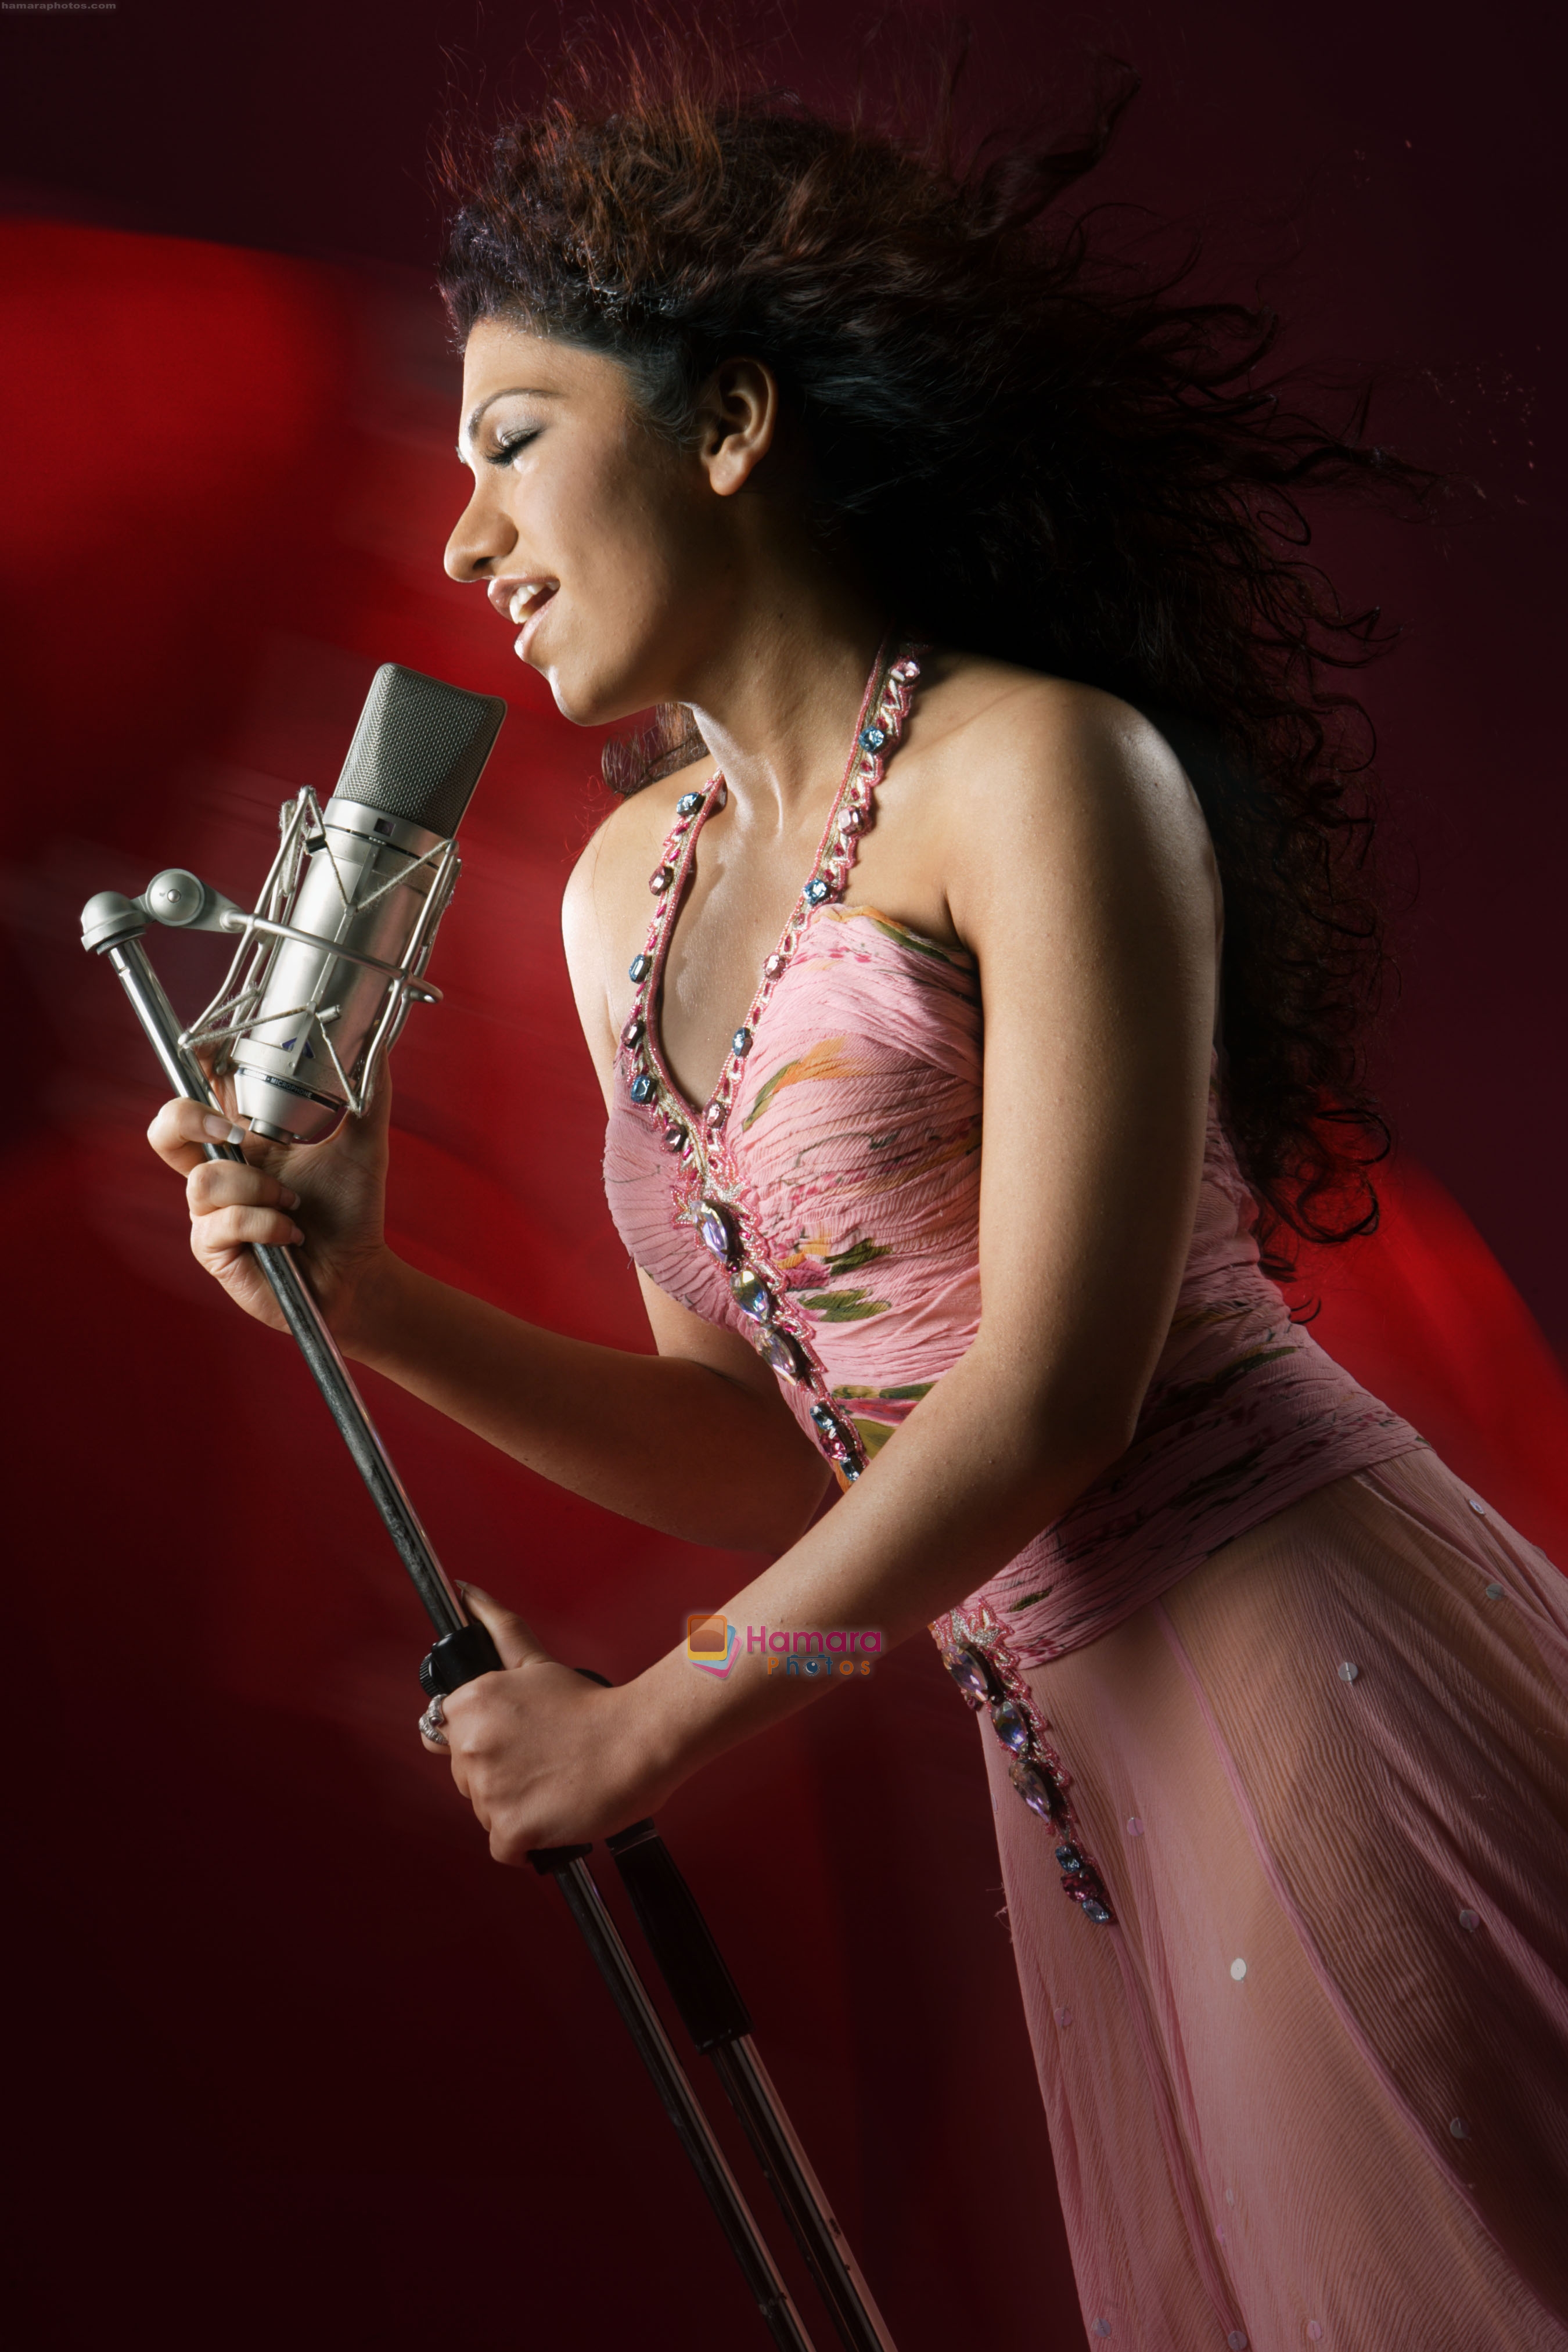 Tulsi Kumar comes out with her maiden solo album on 15th Jan 2009 